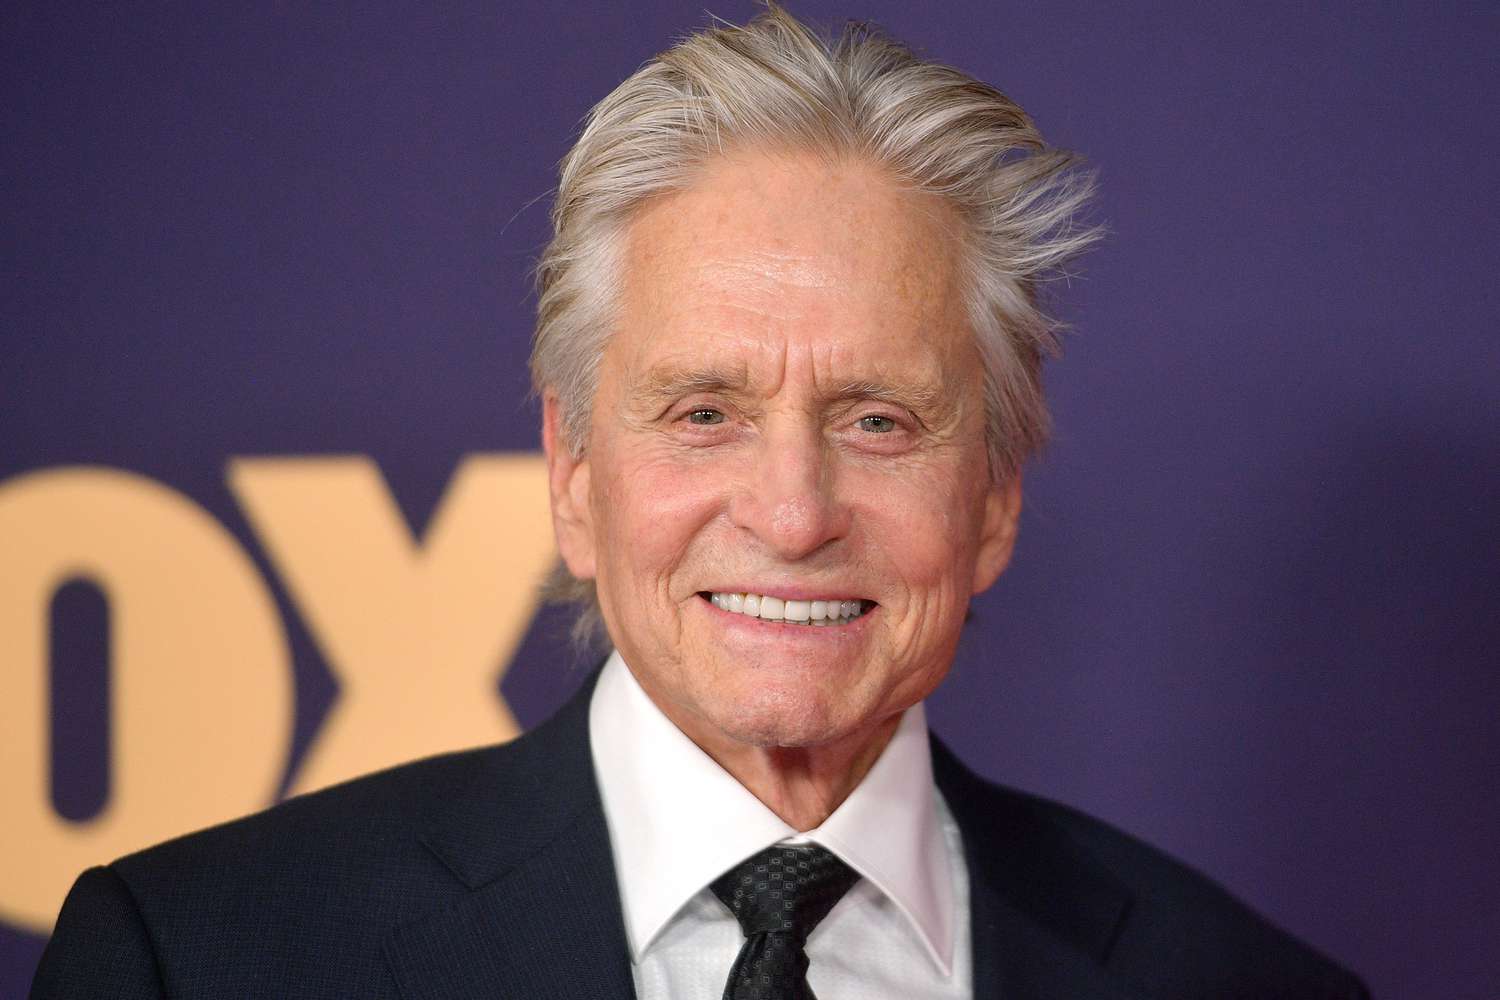 Michael Douglas Compares Filming Sex Scenes Now to His Heyday: 'I'm Past the Age Where I've Got to Worry'